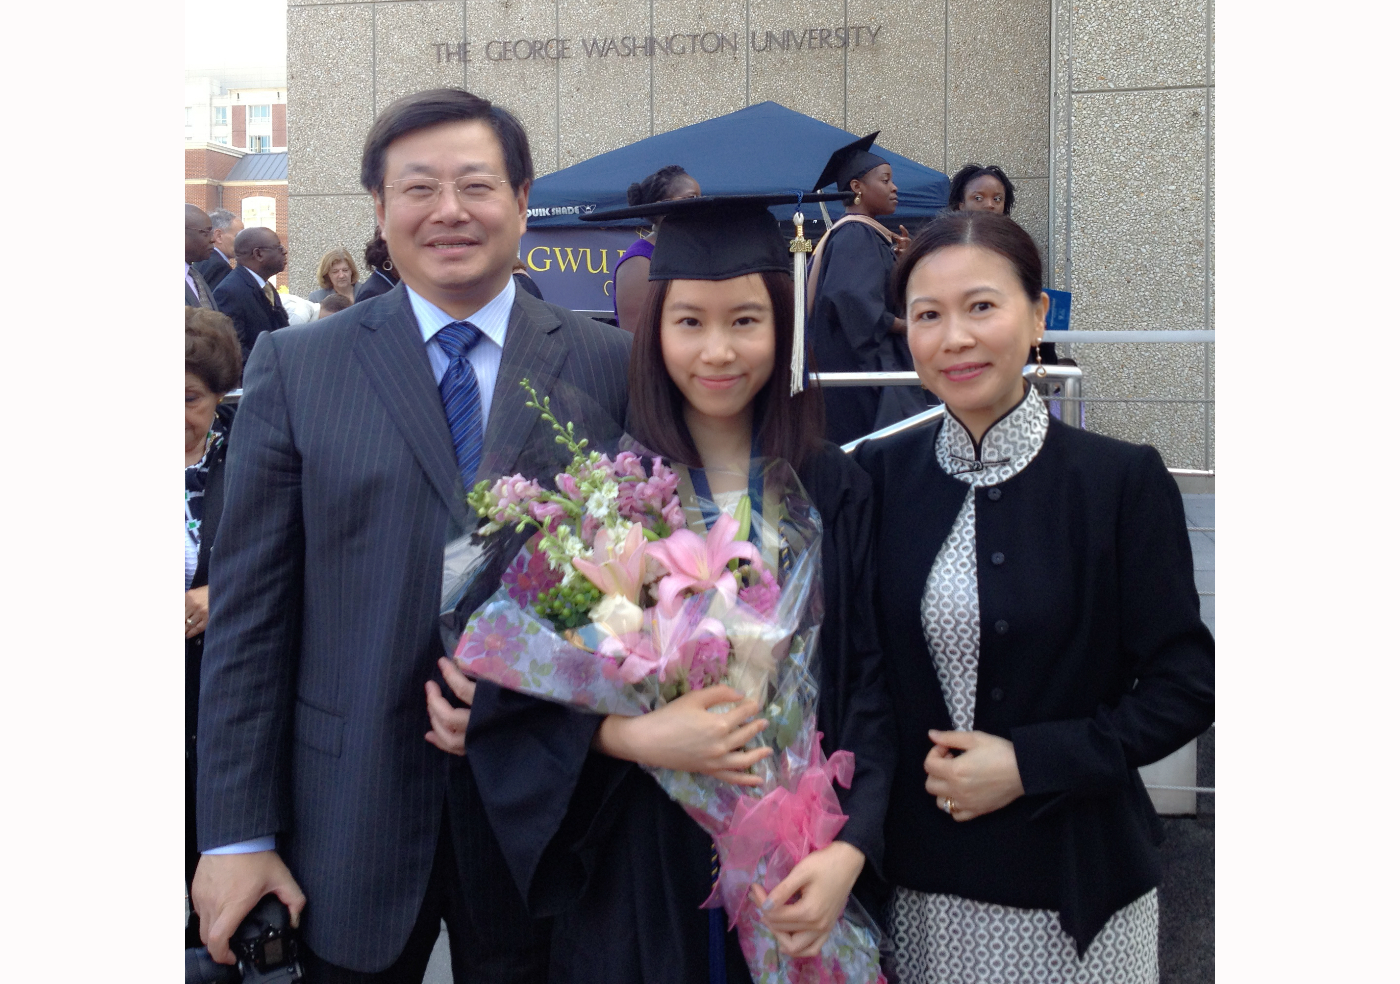 GW parents Jian Zhang and Min Shi and their daughter Isabella Zhang, GWSB B.Accy ’14